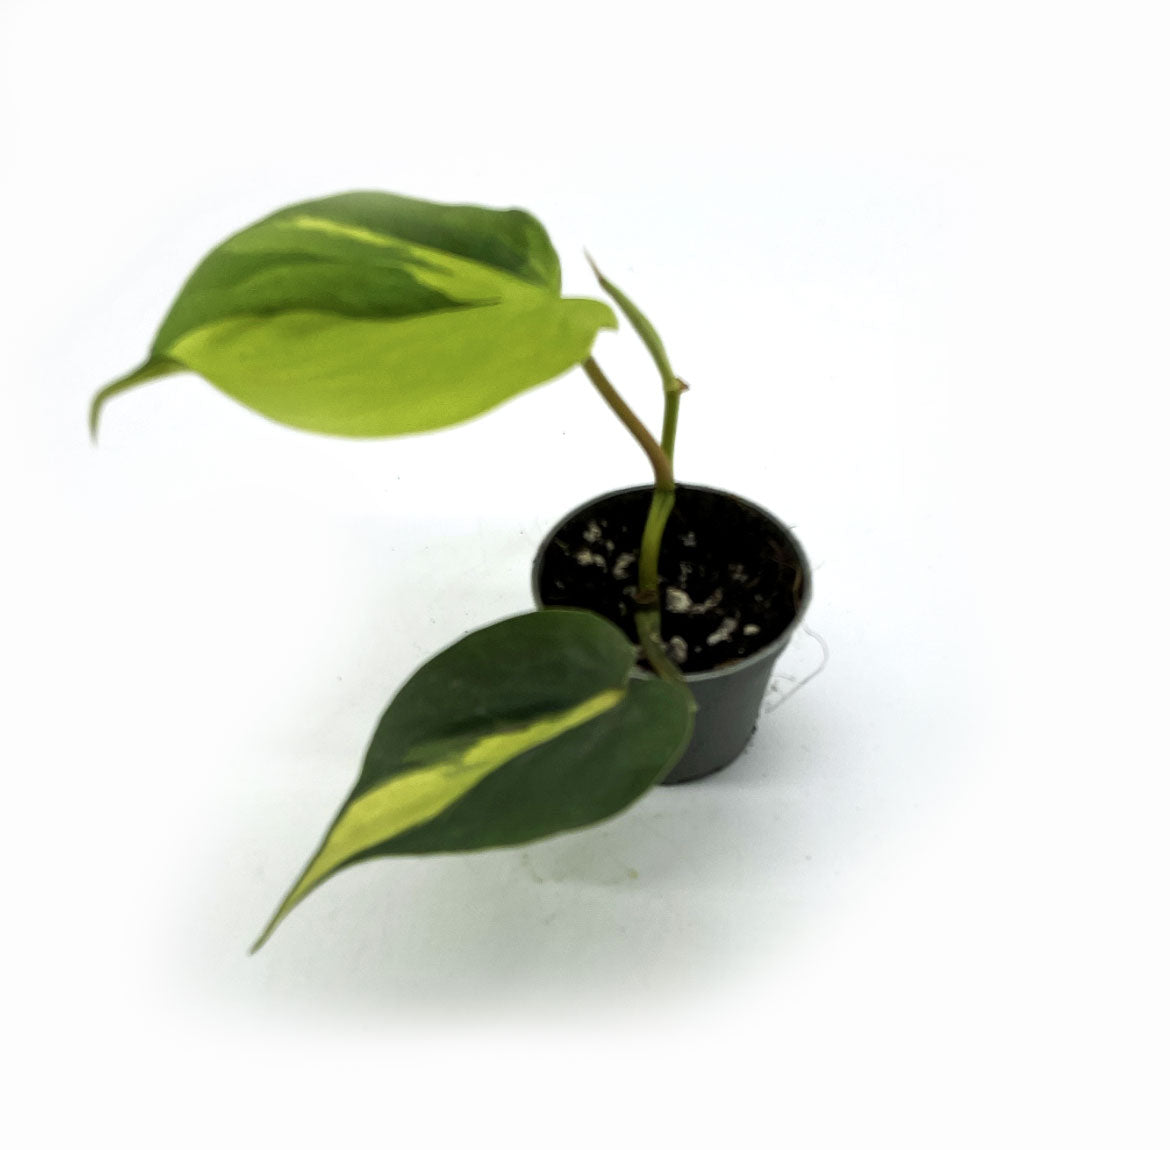 Philodendron hederaceum 'Brasil' | Philodendron scandens 'Brasil' | Kletterphilodendron